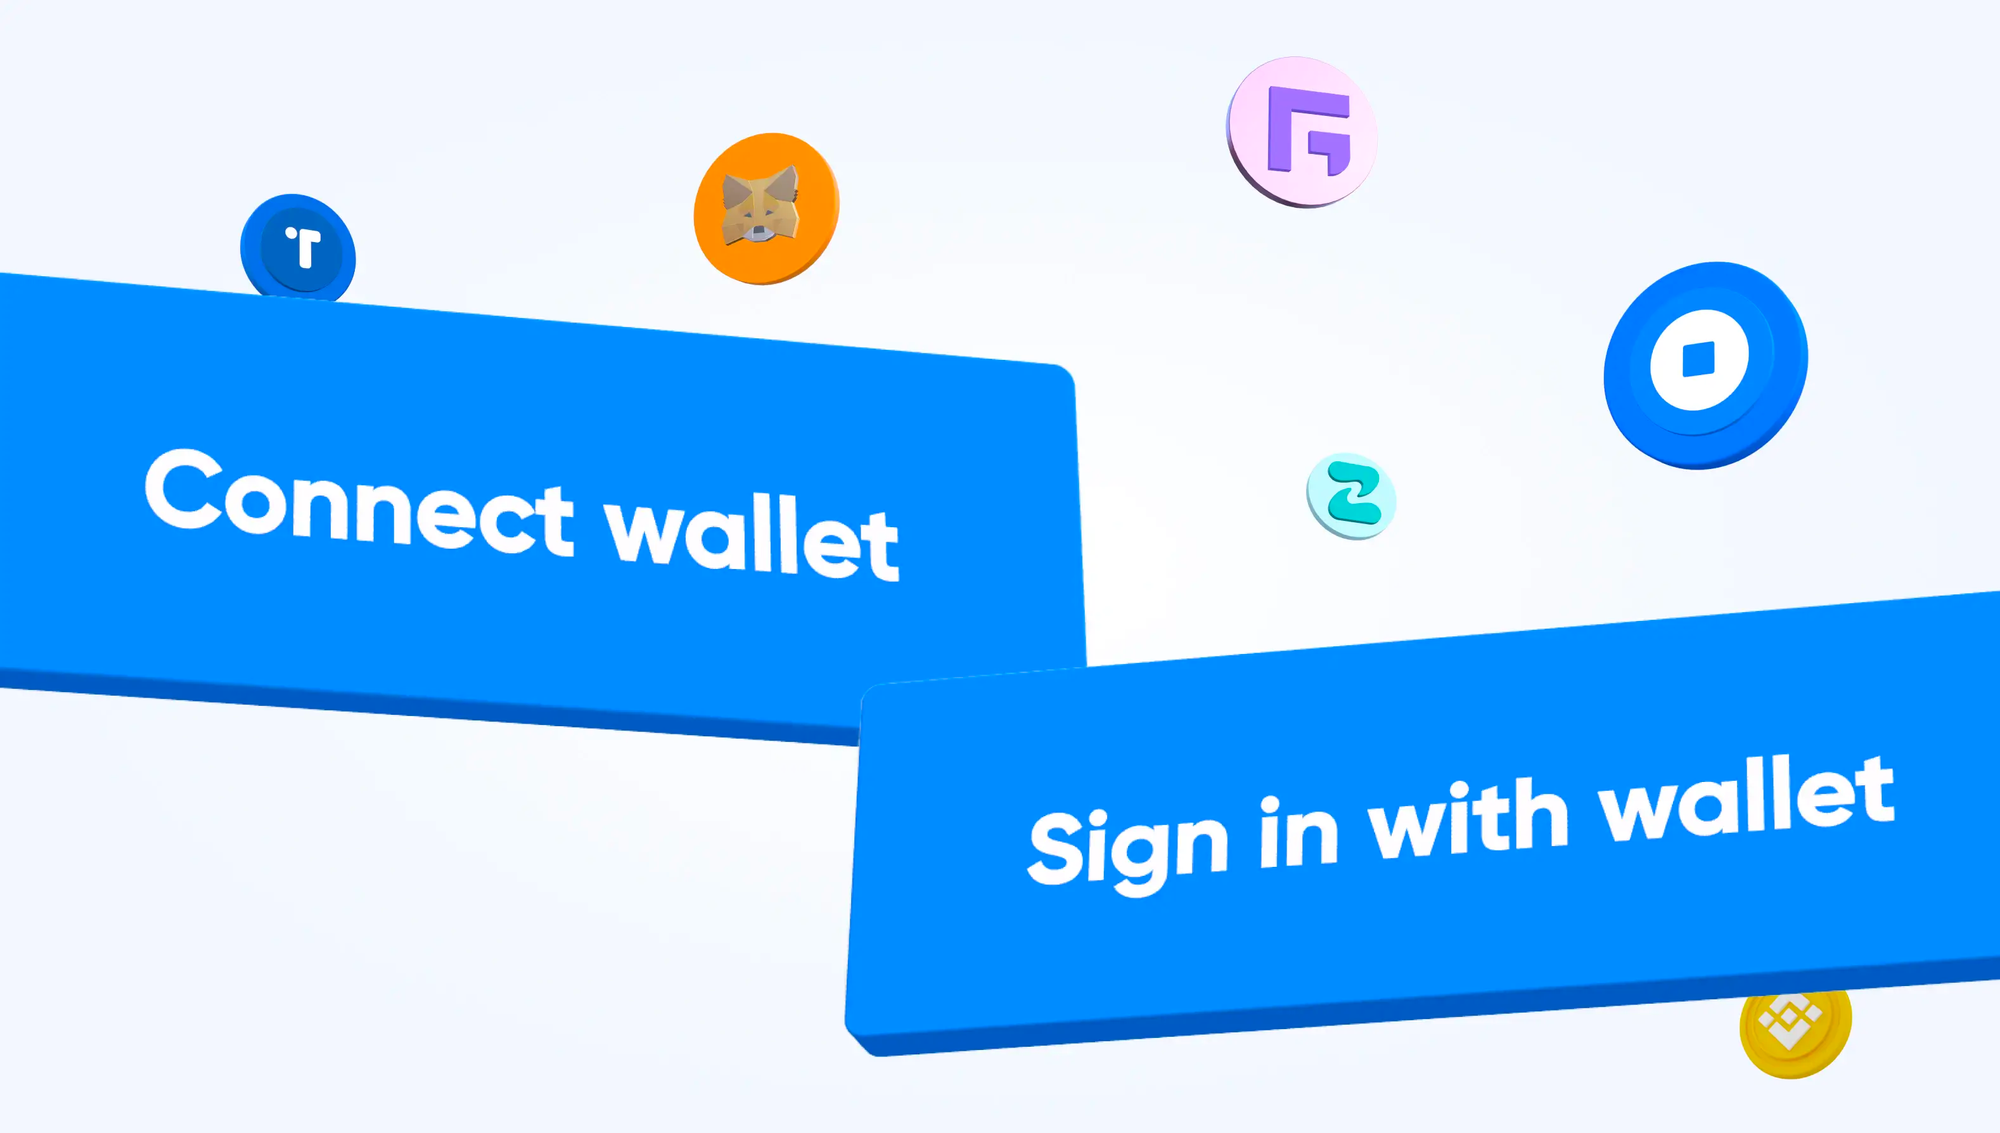 Image Credits: https://www.dynamic.xyz/blog/connecting-vs-sign-in-with-your-wallet